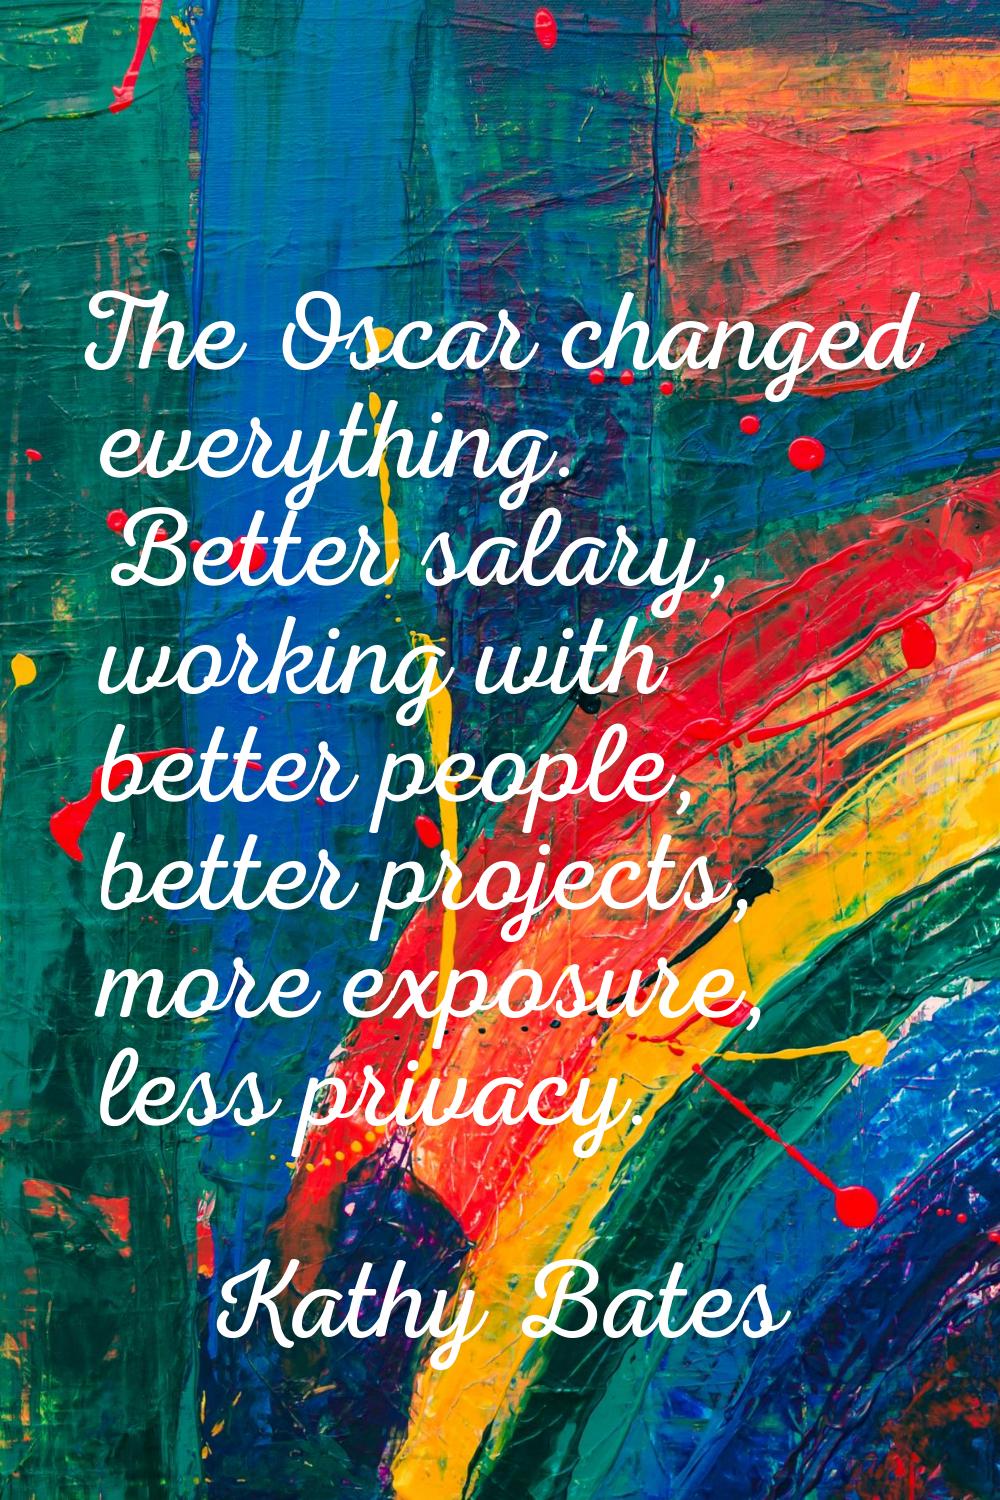 The Oscar changed everything. Better salary, working with better people, better projects, more expo